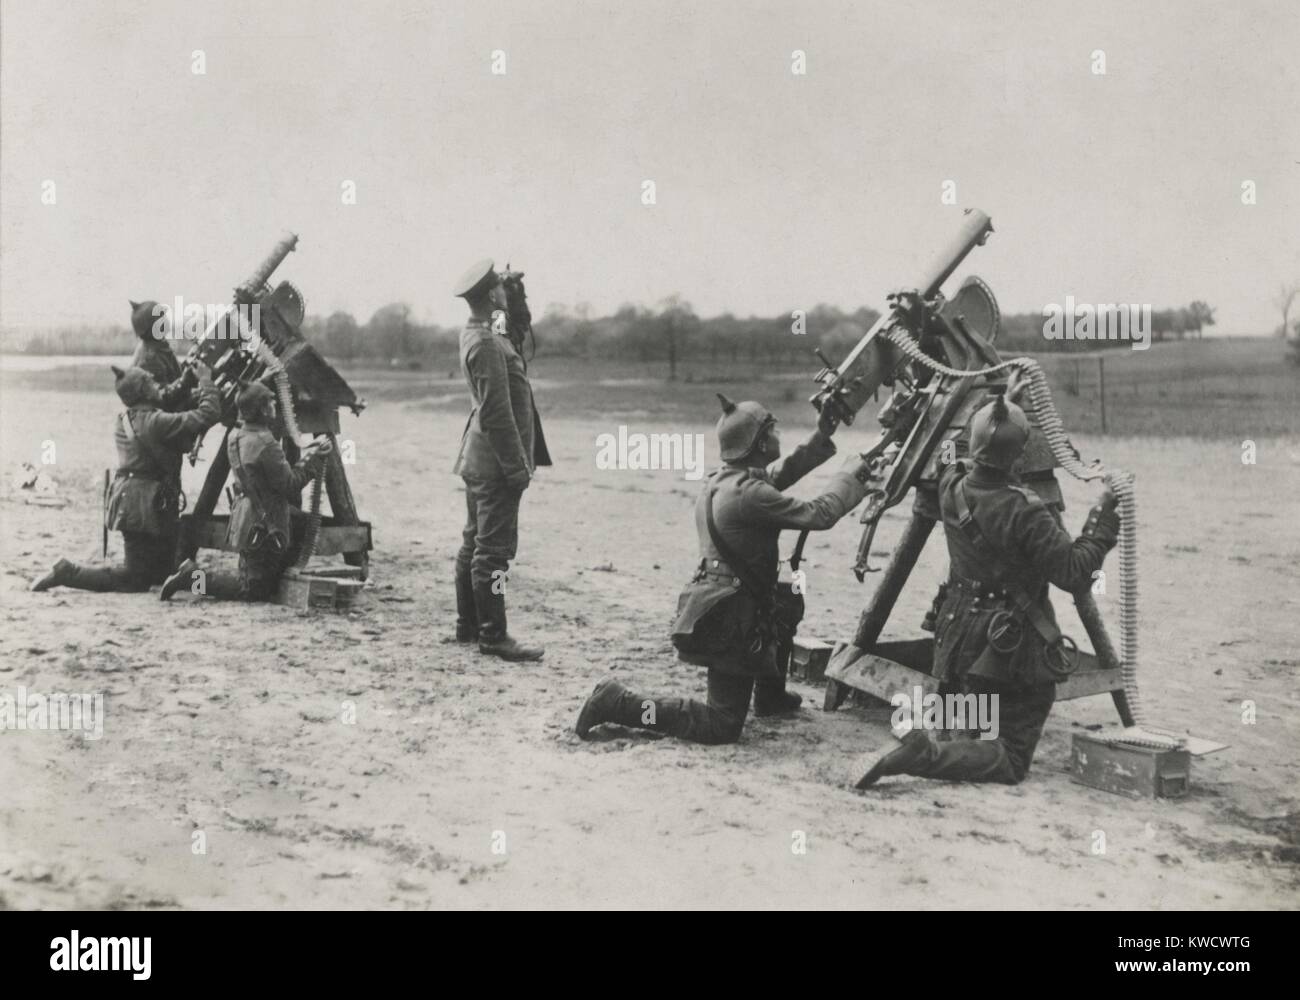 German soldiers on the Eastern Front aiming anti-aircraft machine guns during World War 1 (BSLOC 2017 1 24) Stock Photo